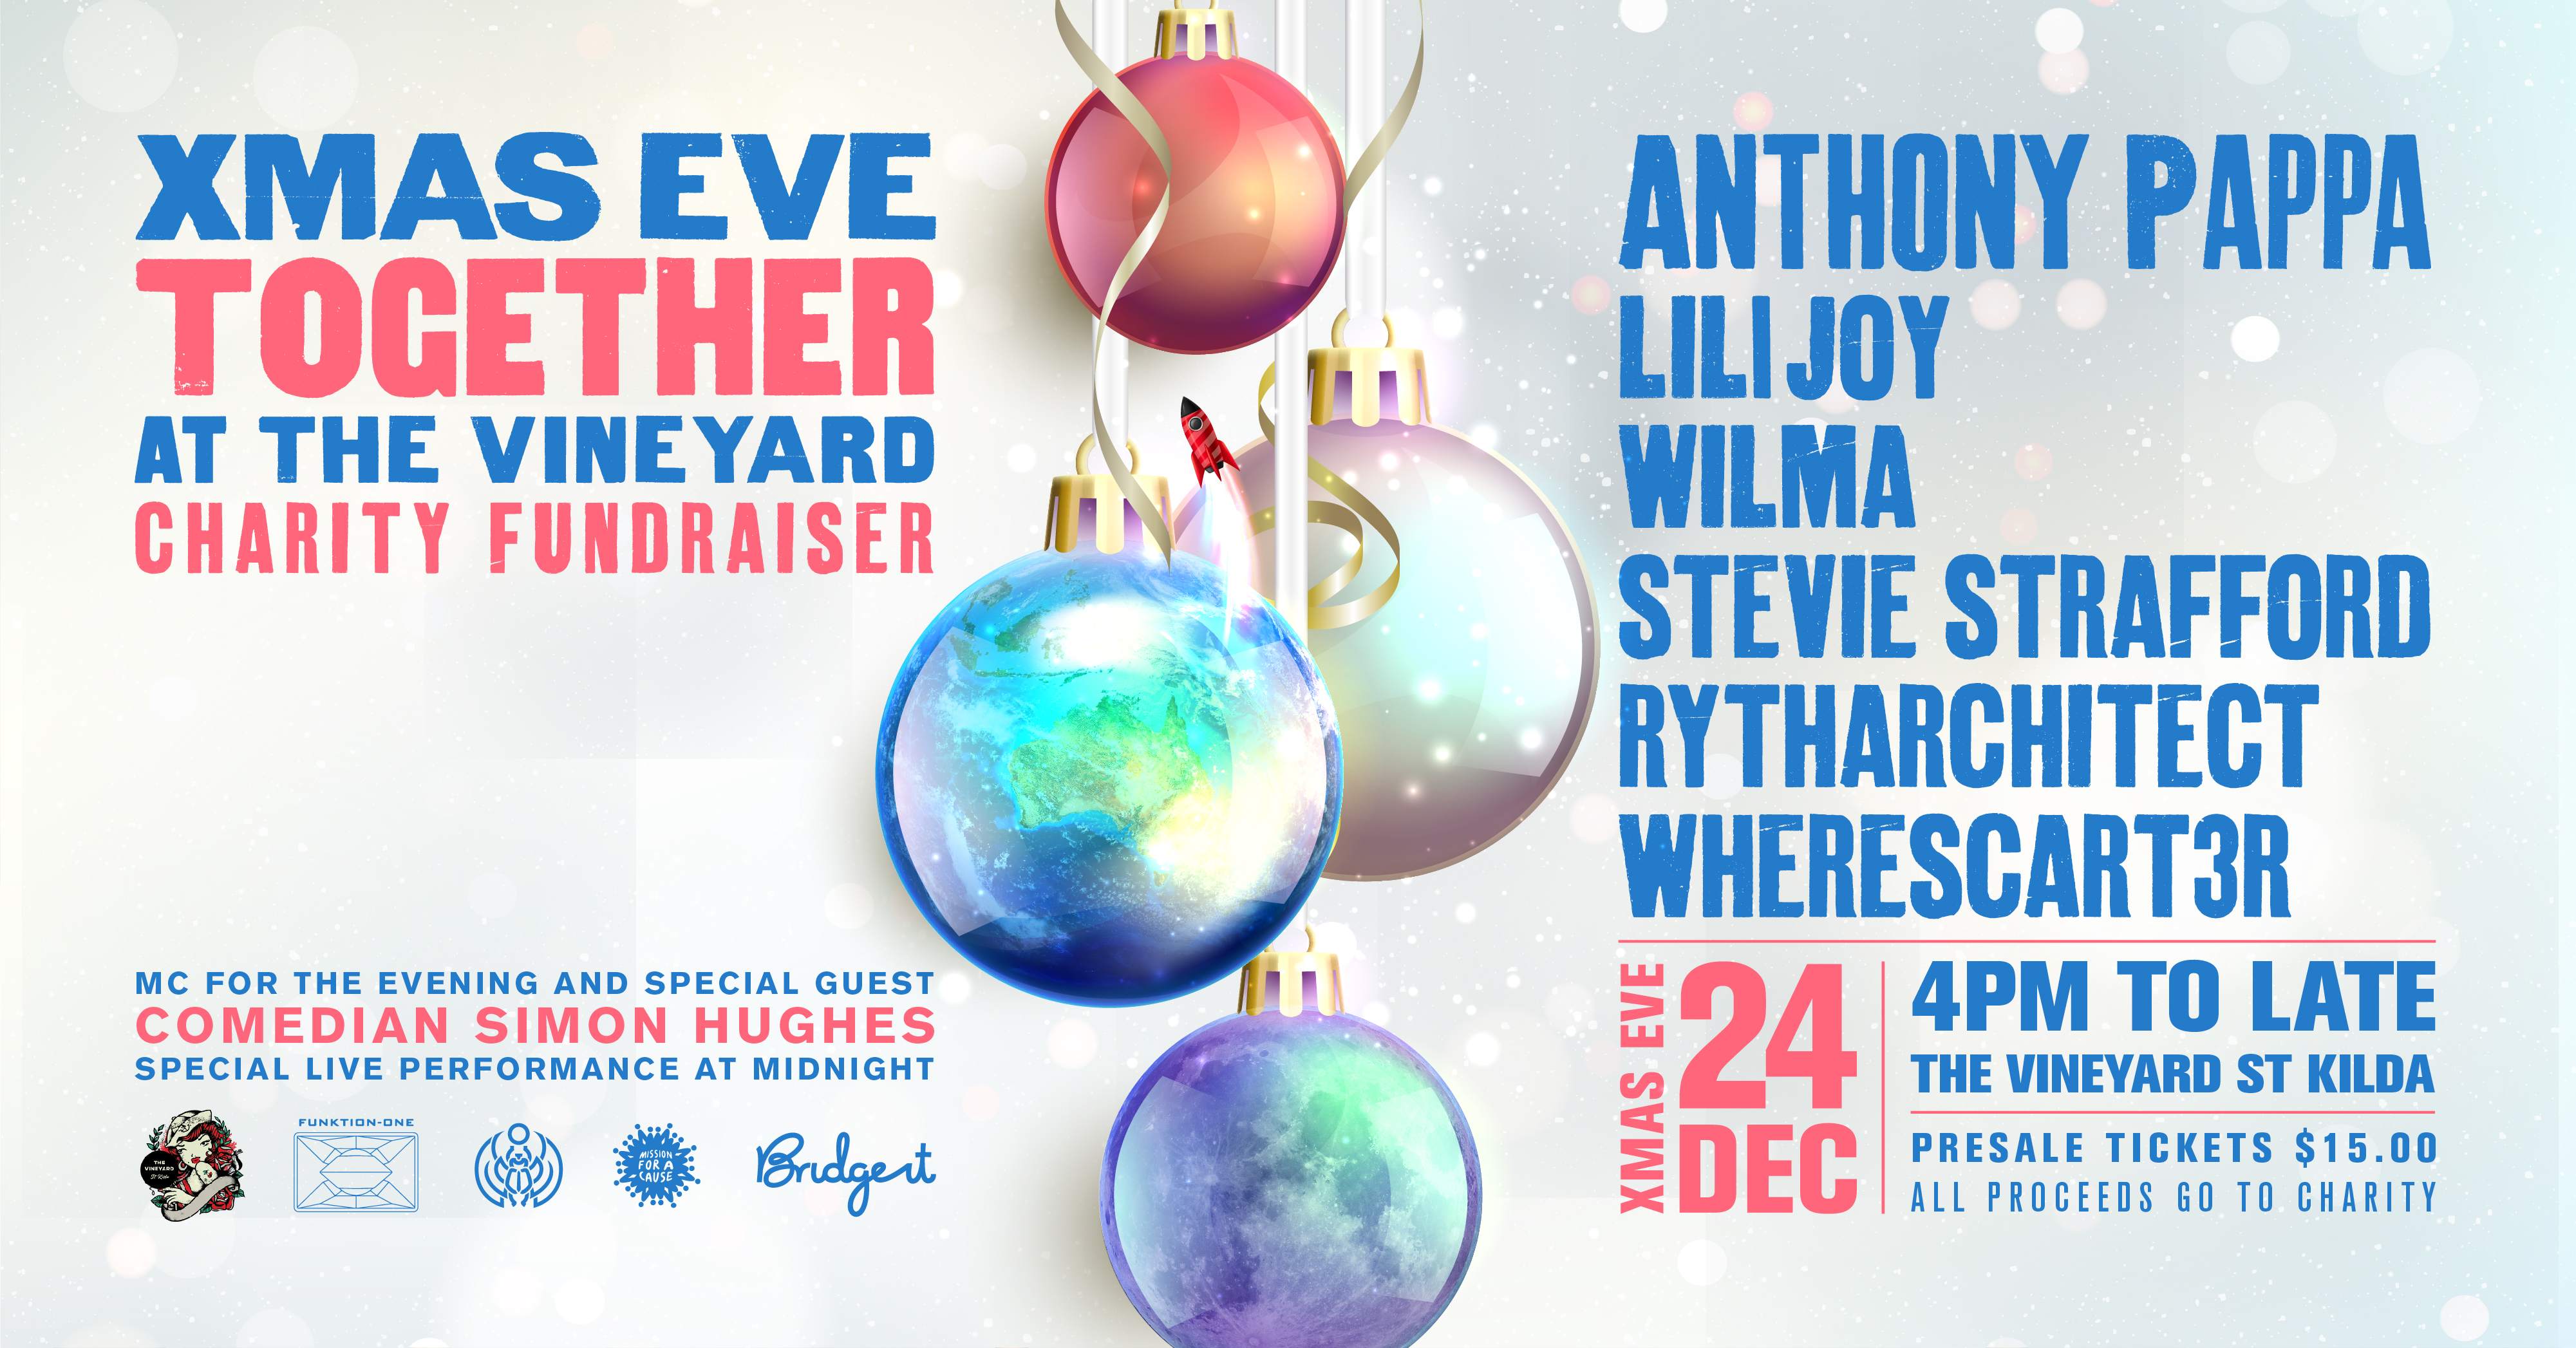 Xmas Eve TOGETHER: CHARITY FUNDRAISER for homelessness - フライヤー表